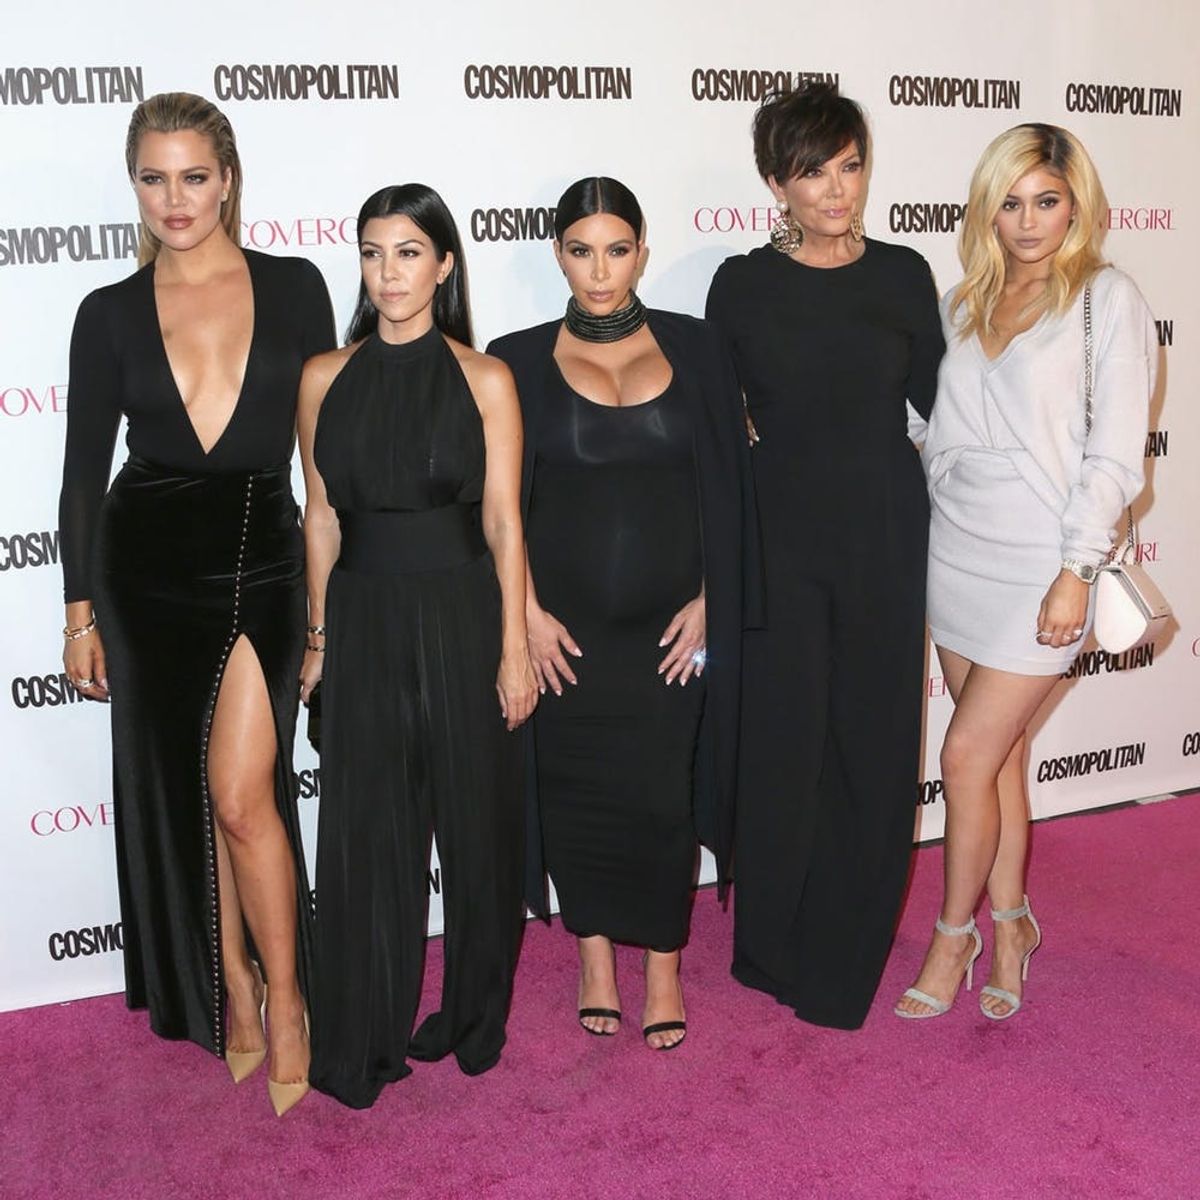 Discover Which Kardashian You Are, Based on Your Horoscope Sign